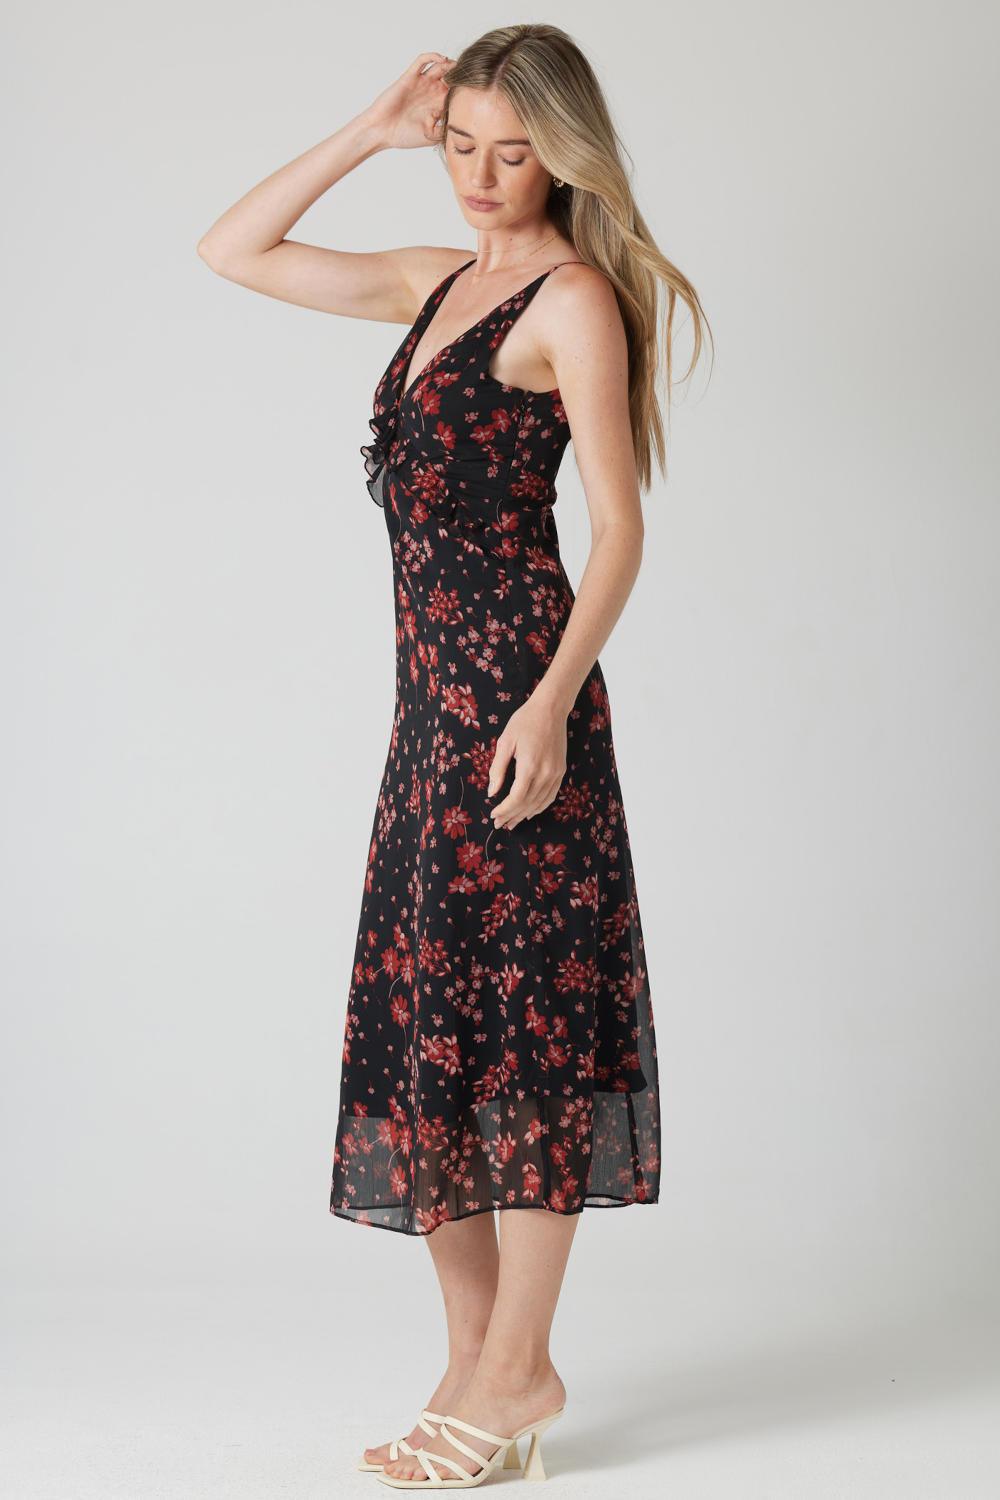 Gilmore Dress - Strawberry Moon Boutique